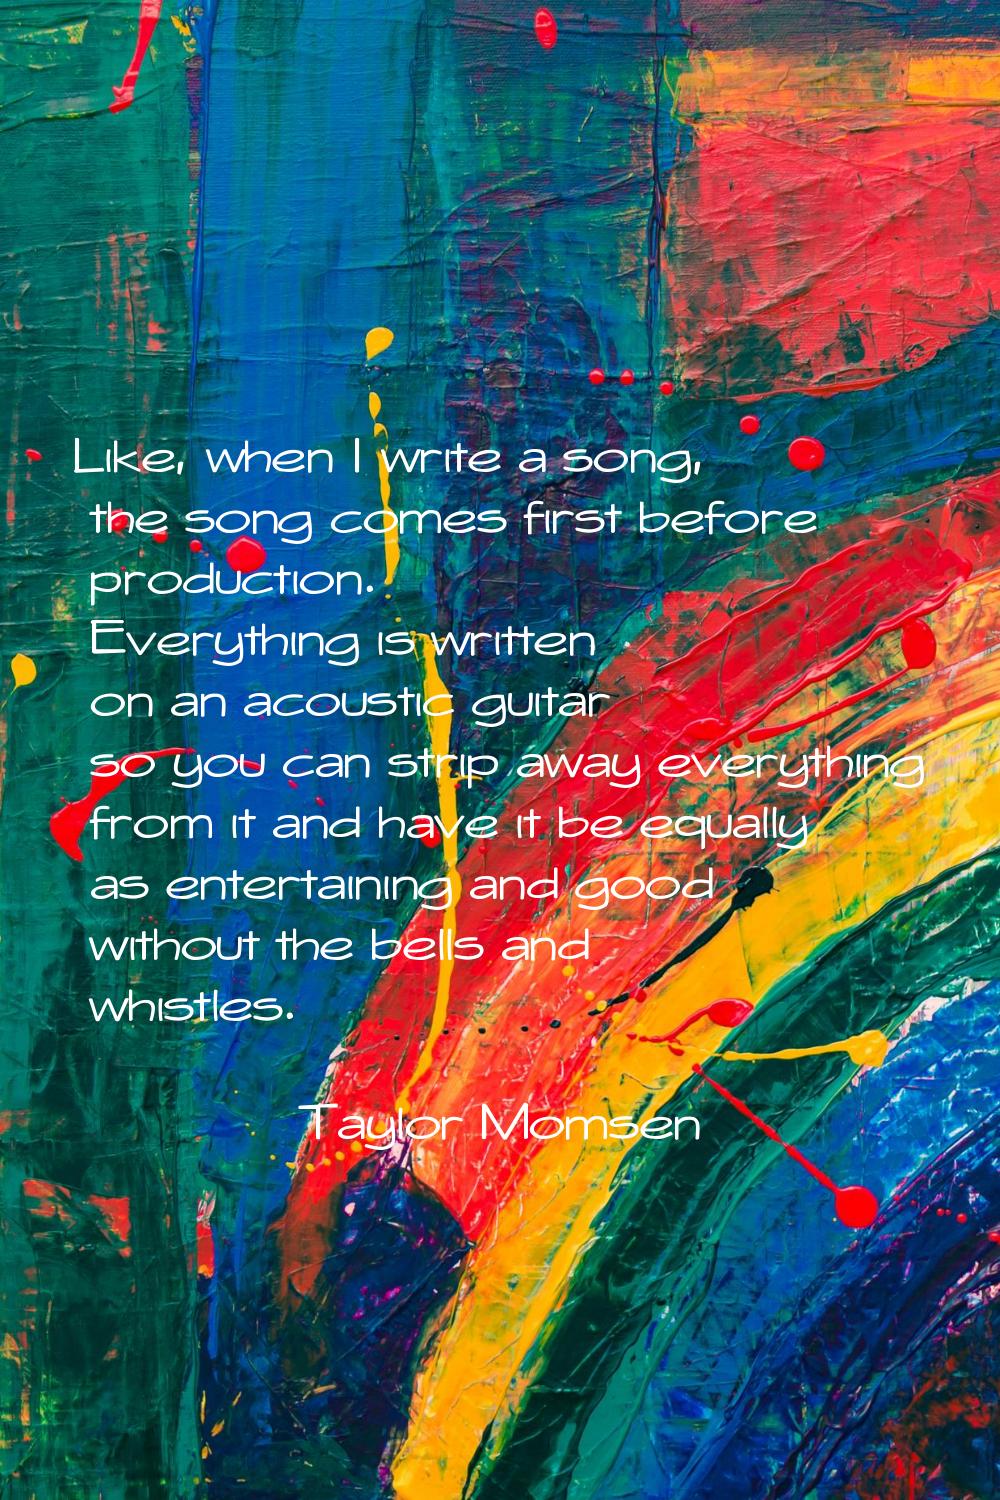 Like, when I write a song, the song comes first before production. Everything is written on an acou